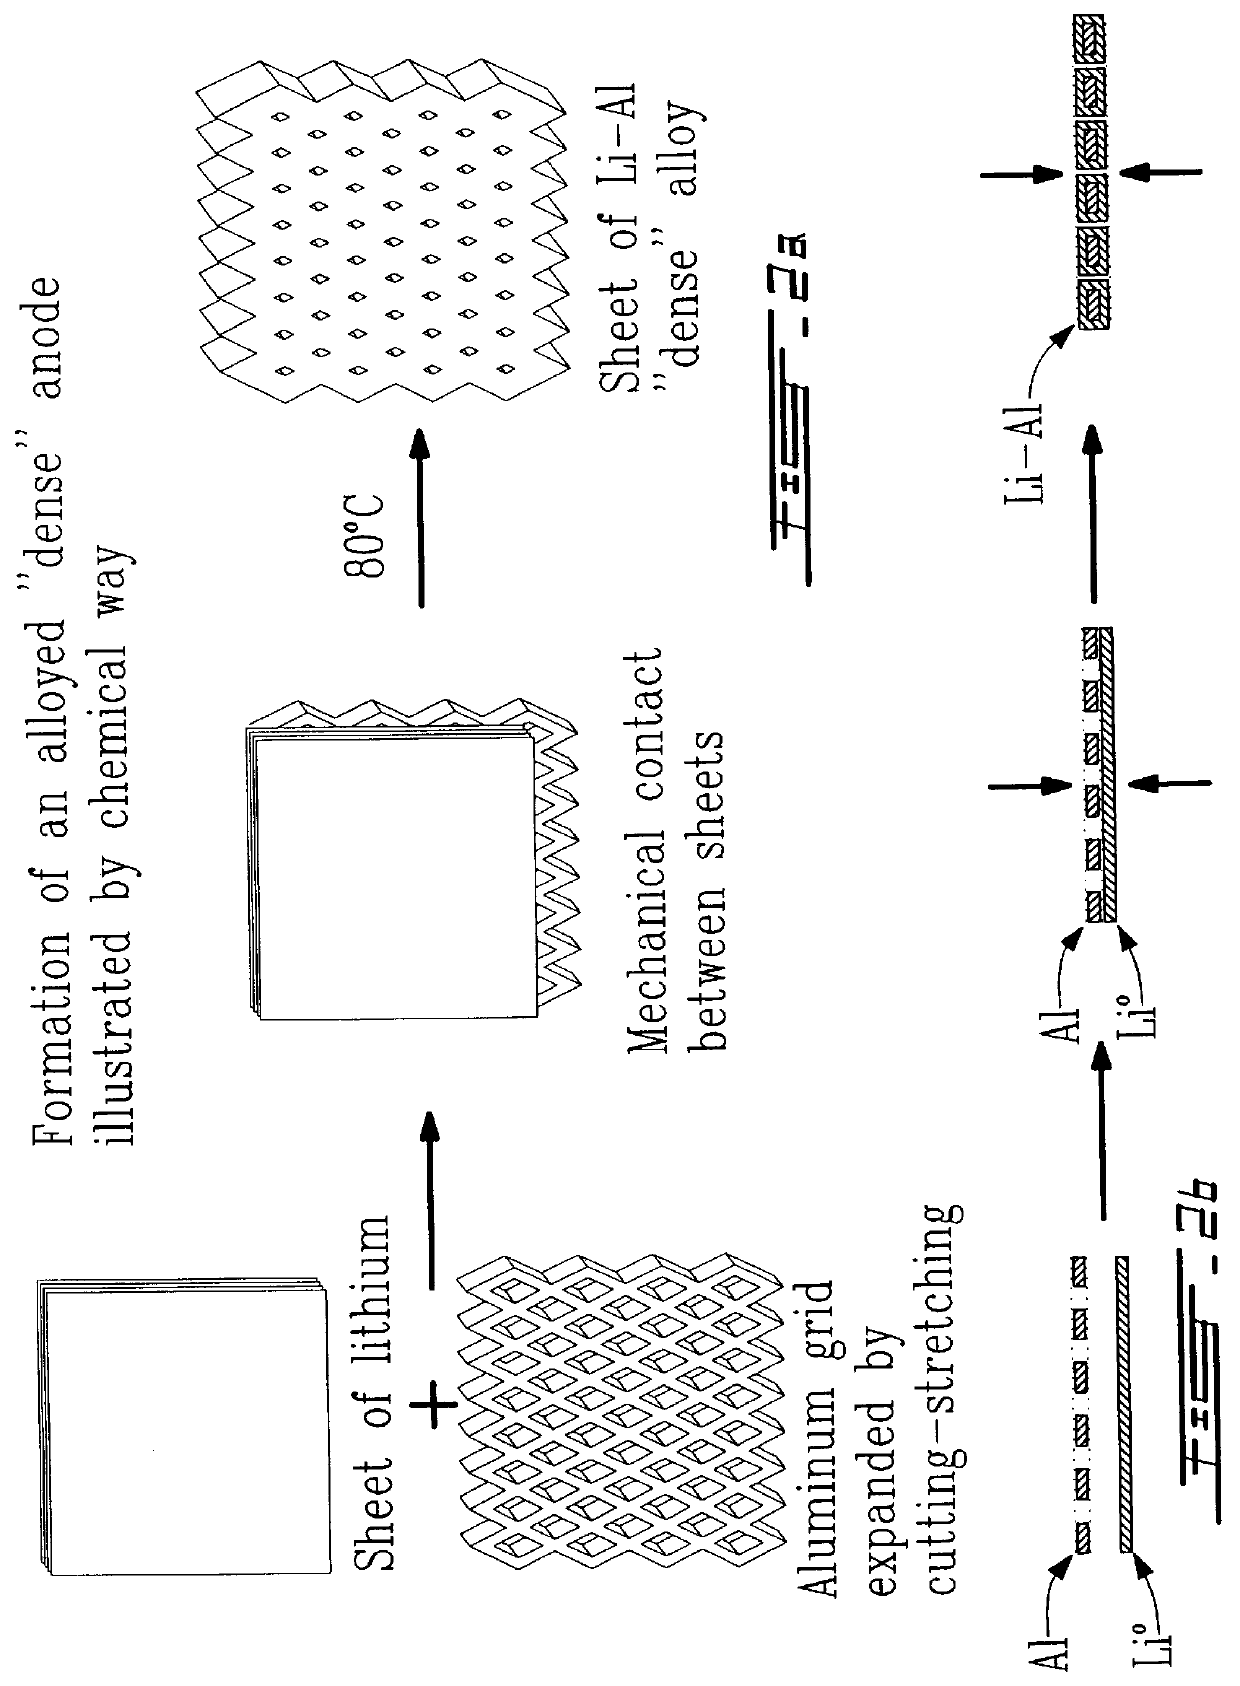 Alloyed and dense anode sheet with local stress relaxation